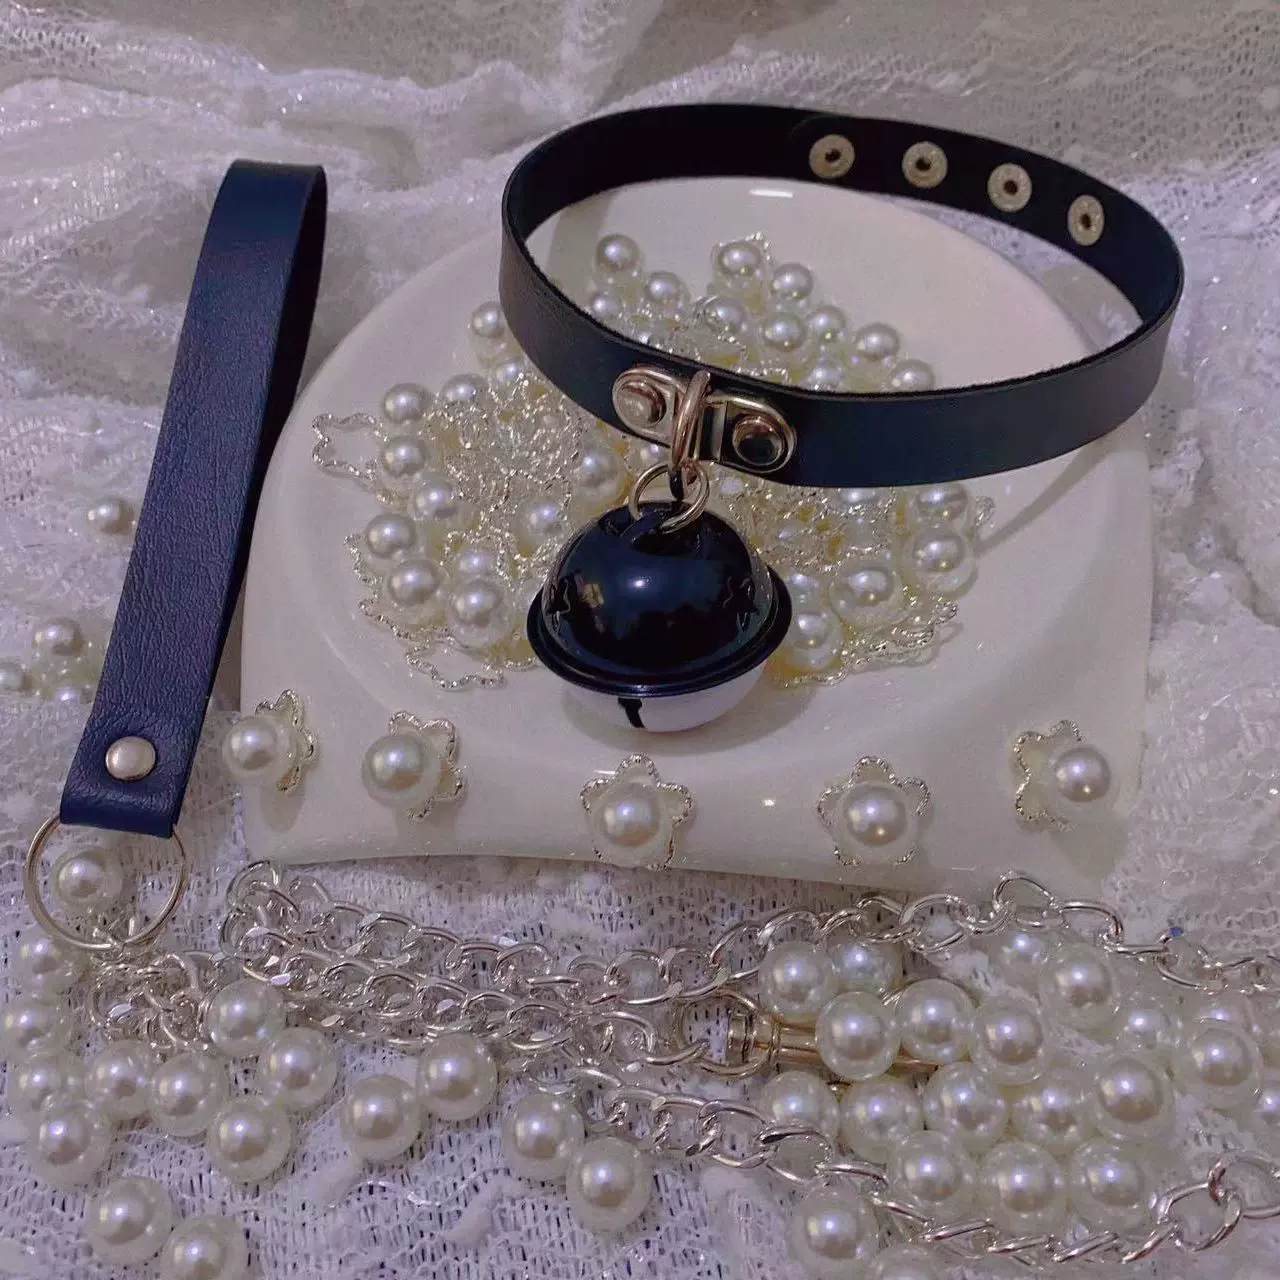 Moon Pearl Choker Necklace